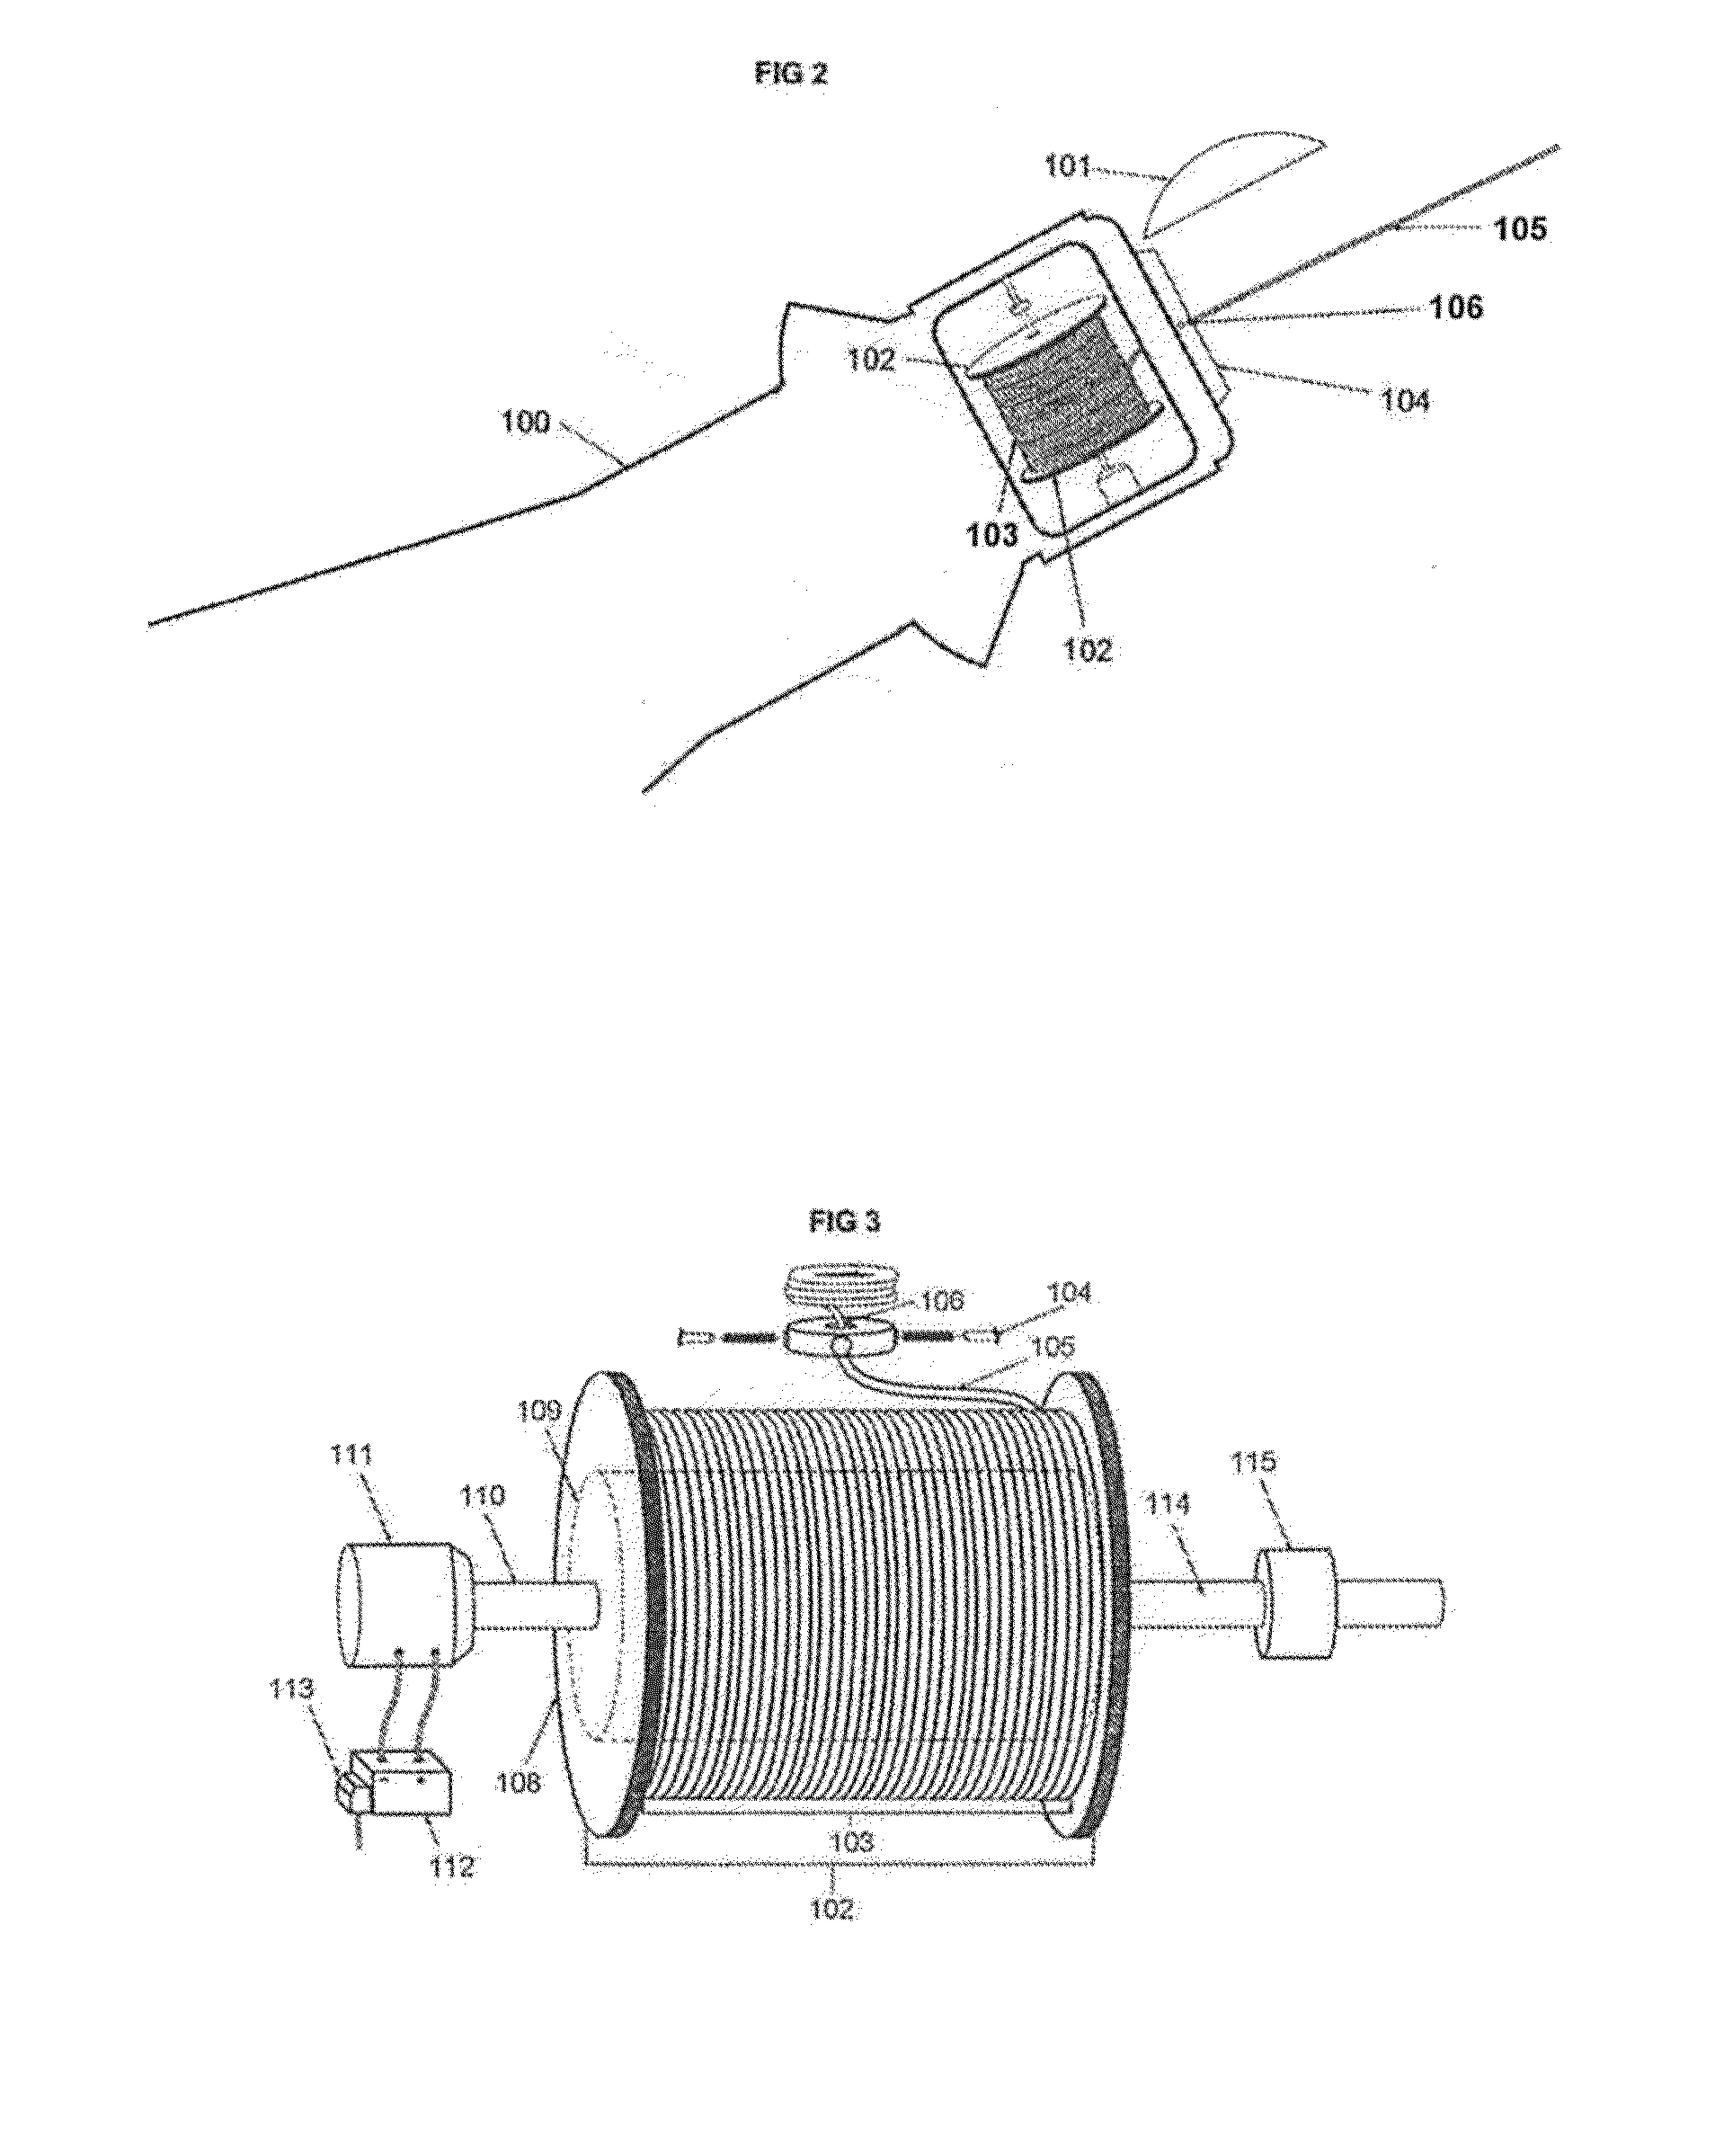 Tether for spacecraft reaction control system